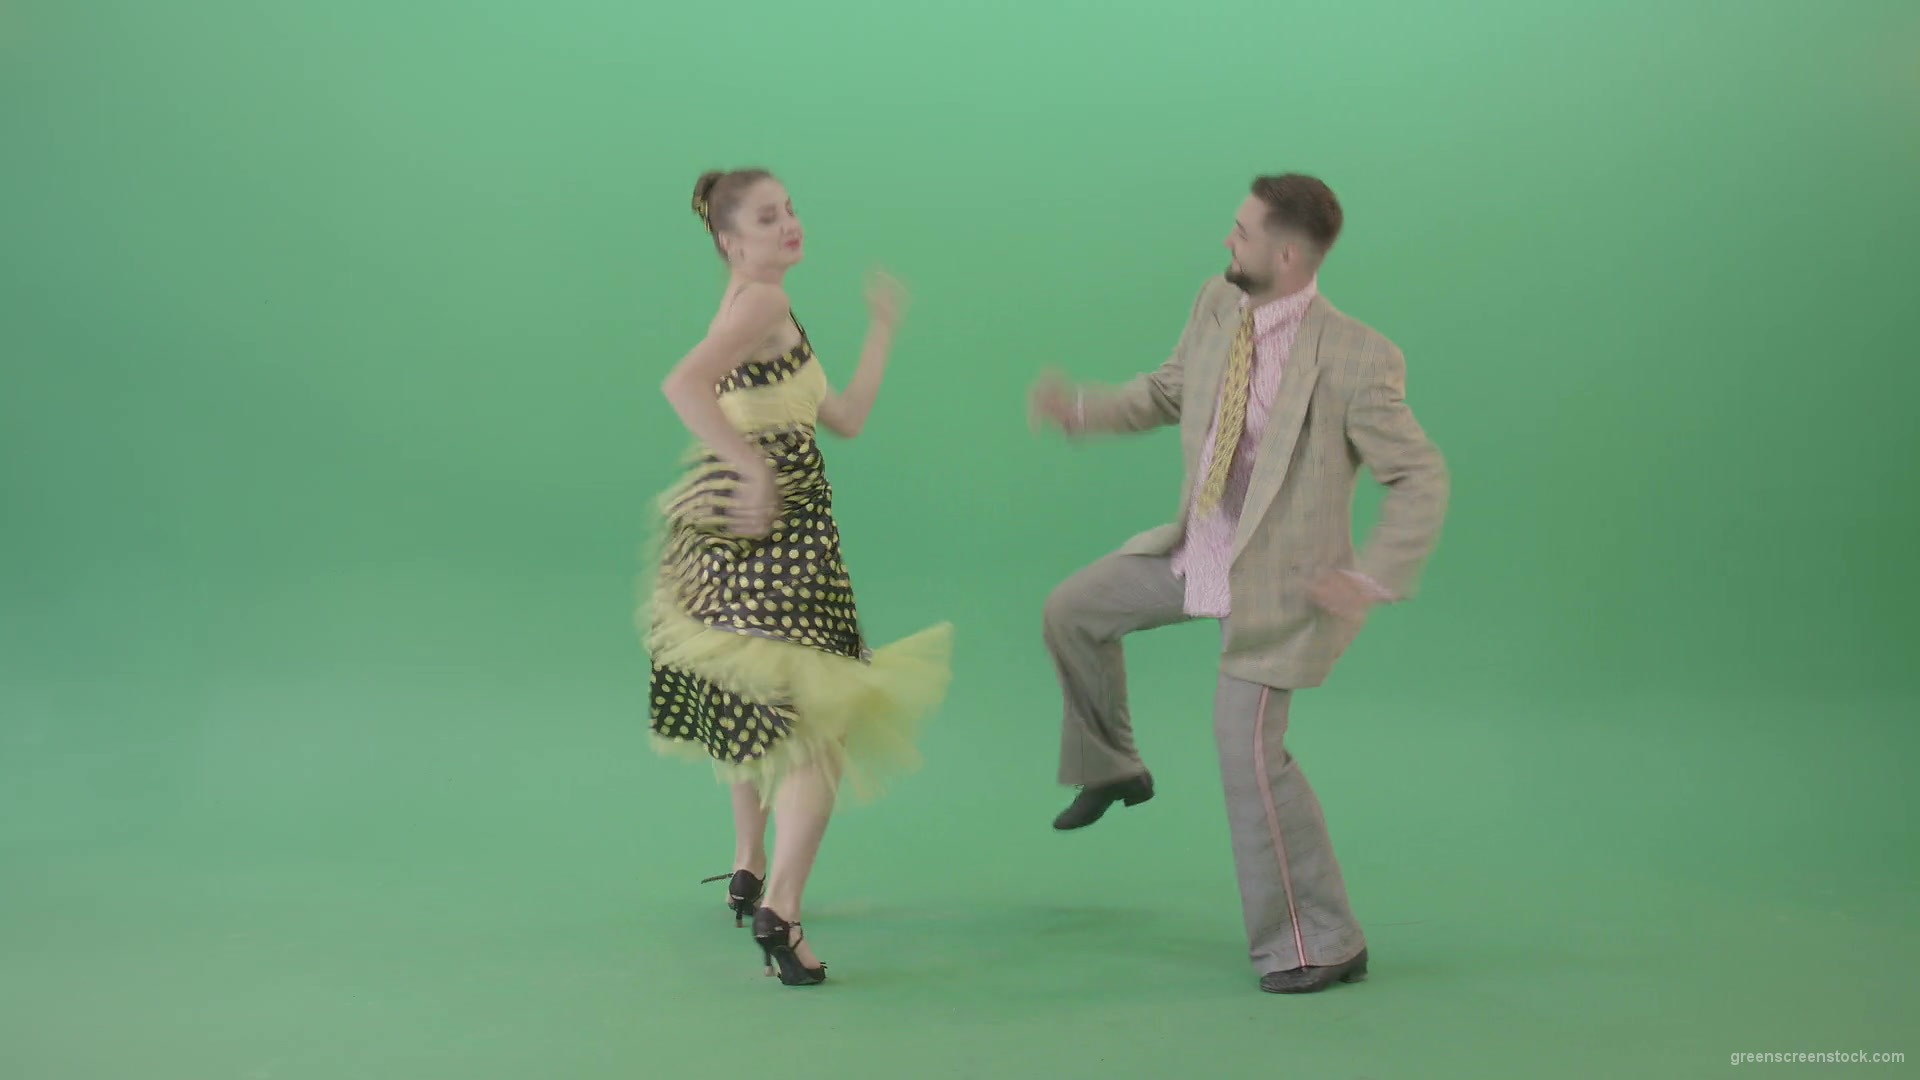 Boy-and-Girl-dancing-Boogie-woogie-and-rockandroll-isolated-on-Green-Screen-4K-Video-Footage-1920_006 Green Screen Stock